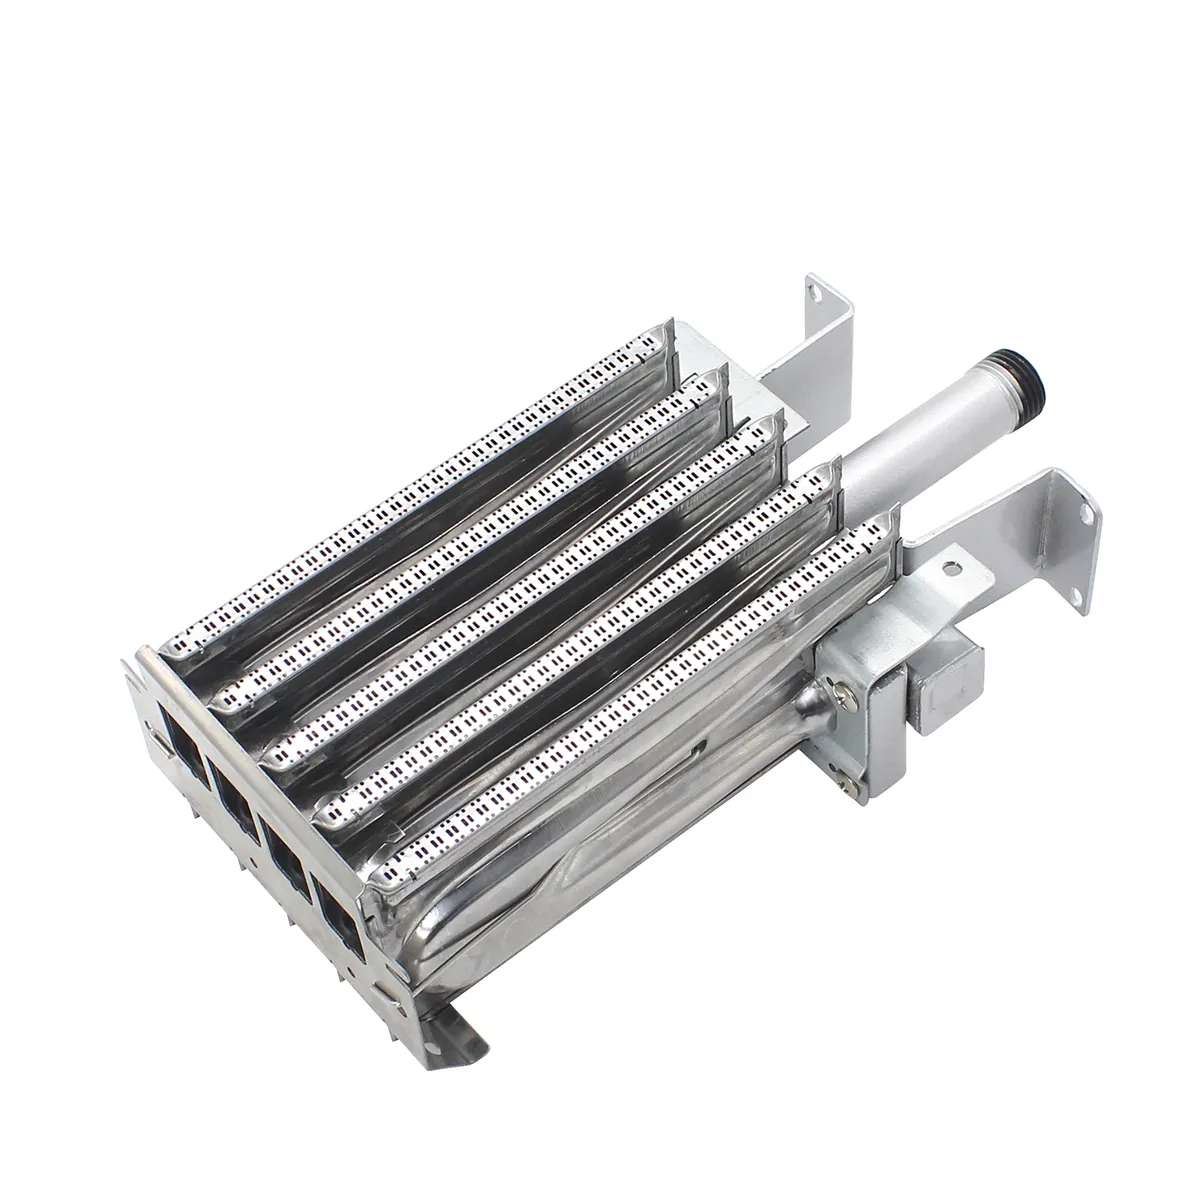 Steel High Quality gas wall-mounted furnace fire grate made in china